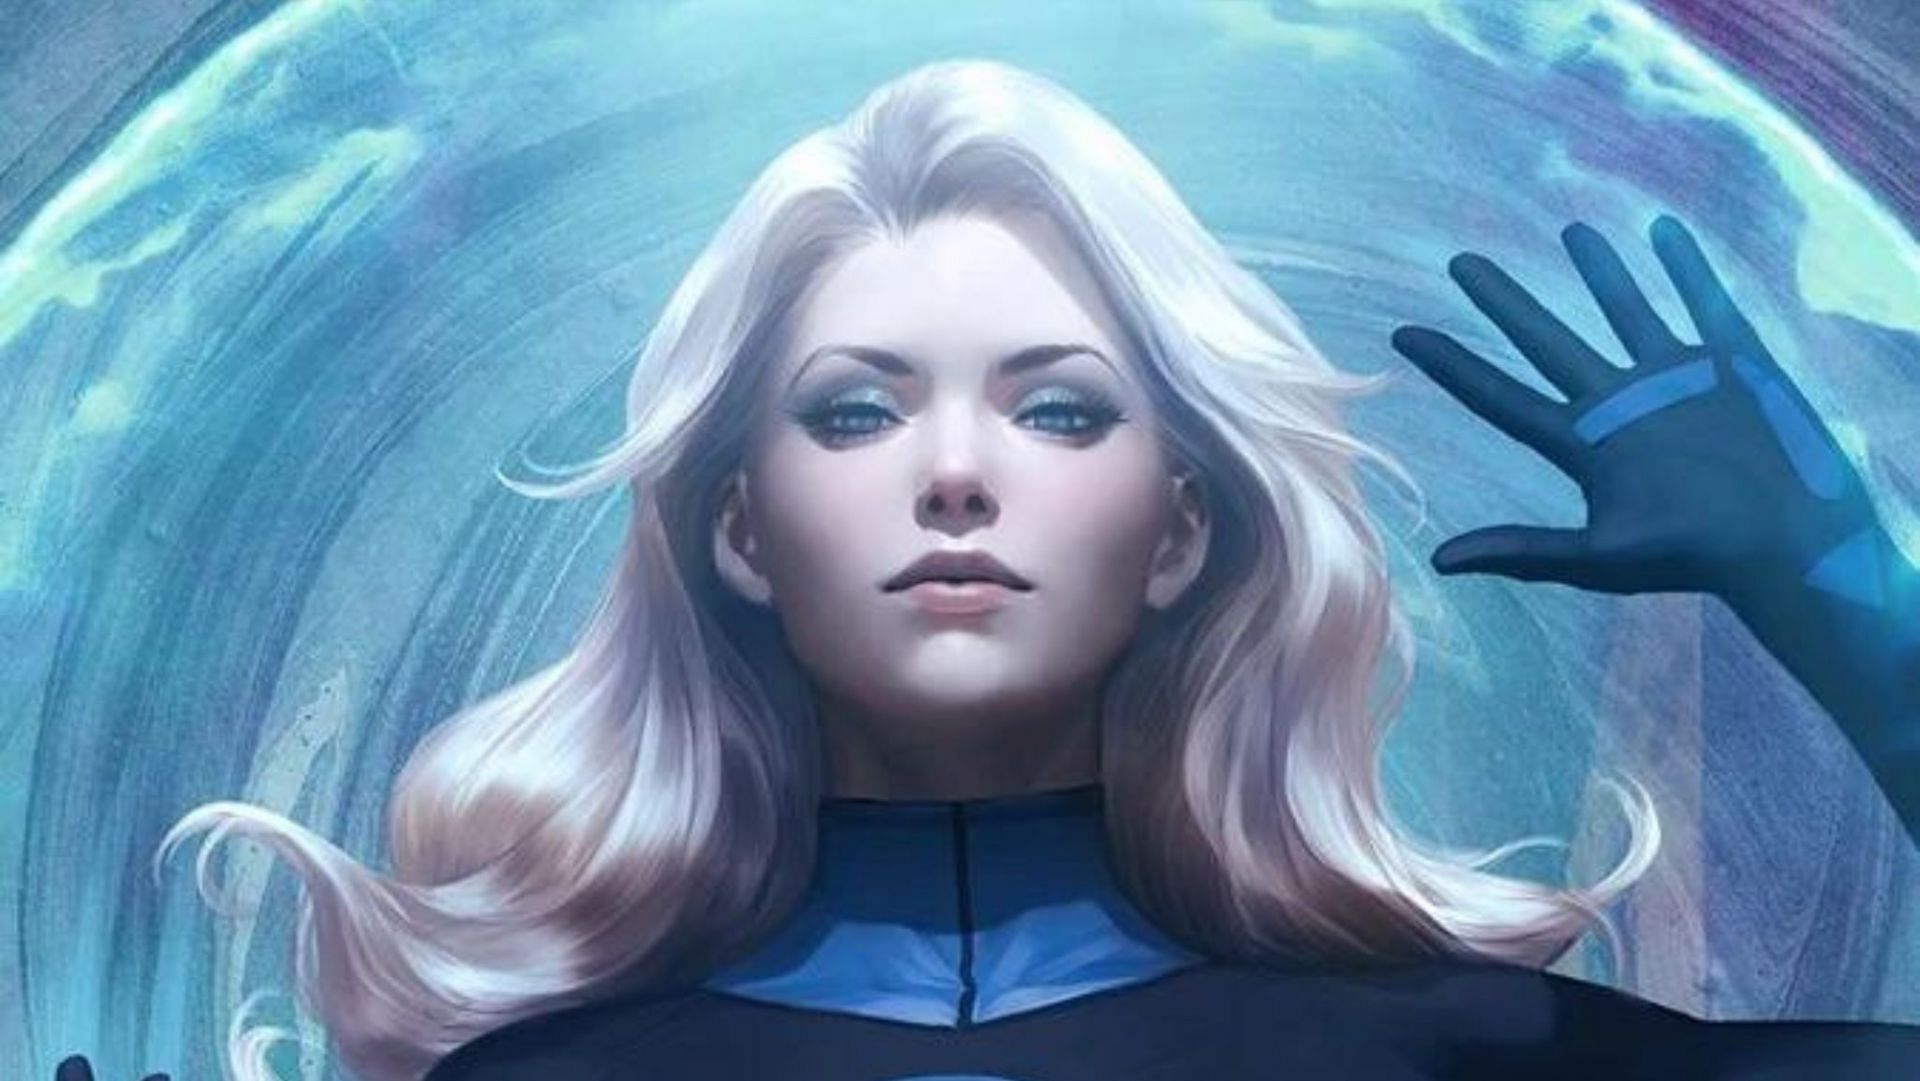 Sue Storm, the Fantastic Feminist Icon: Breaking down gender barriers and inspiring women to pursue their own paths (Image via Marvel Comics)